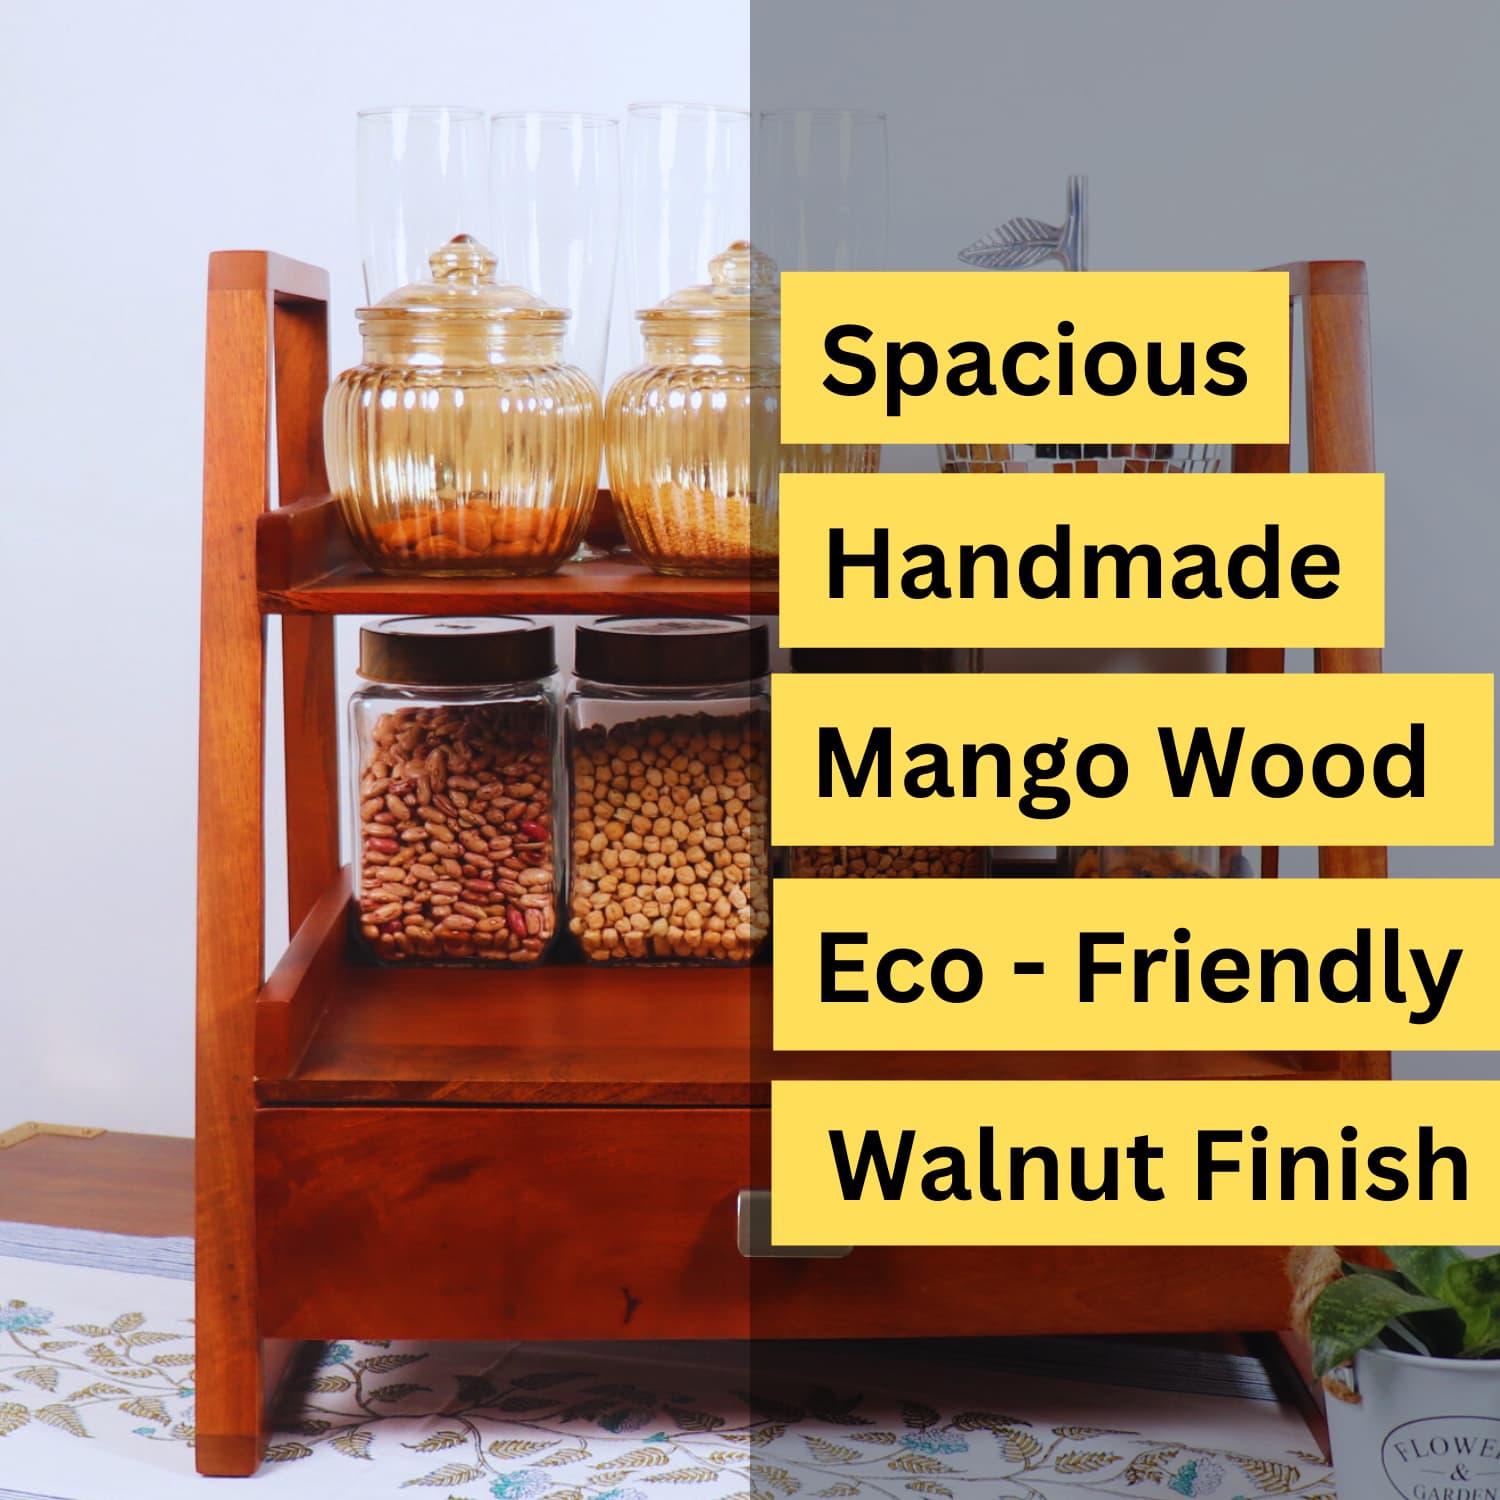 A two-tier handmade kitchen storage rack made from mango wood with a walnut finish. The top tier holds two glass jars with ribbed gold-tone lids, while the bottom tier has two square glass containers filled with nuts. Overlay text reads: Spacious, Handmade, Mango Wood, Eco-Friendly, Walnut Finish. Product Name: The Terra Manilla Wooden Kitchen Versatile Organizer by LOOSEBUCKET.